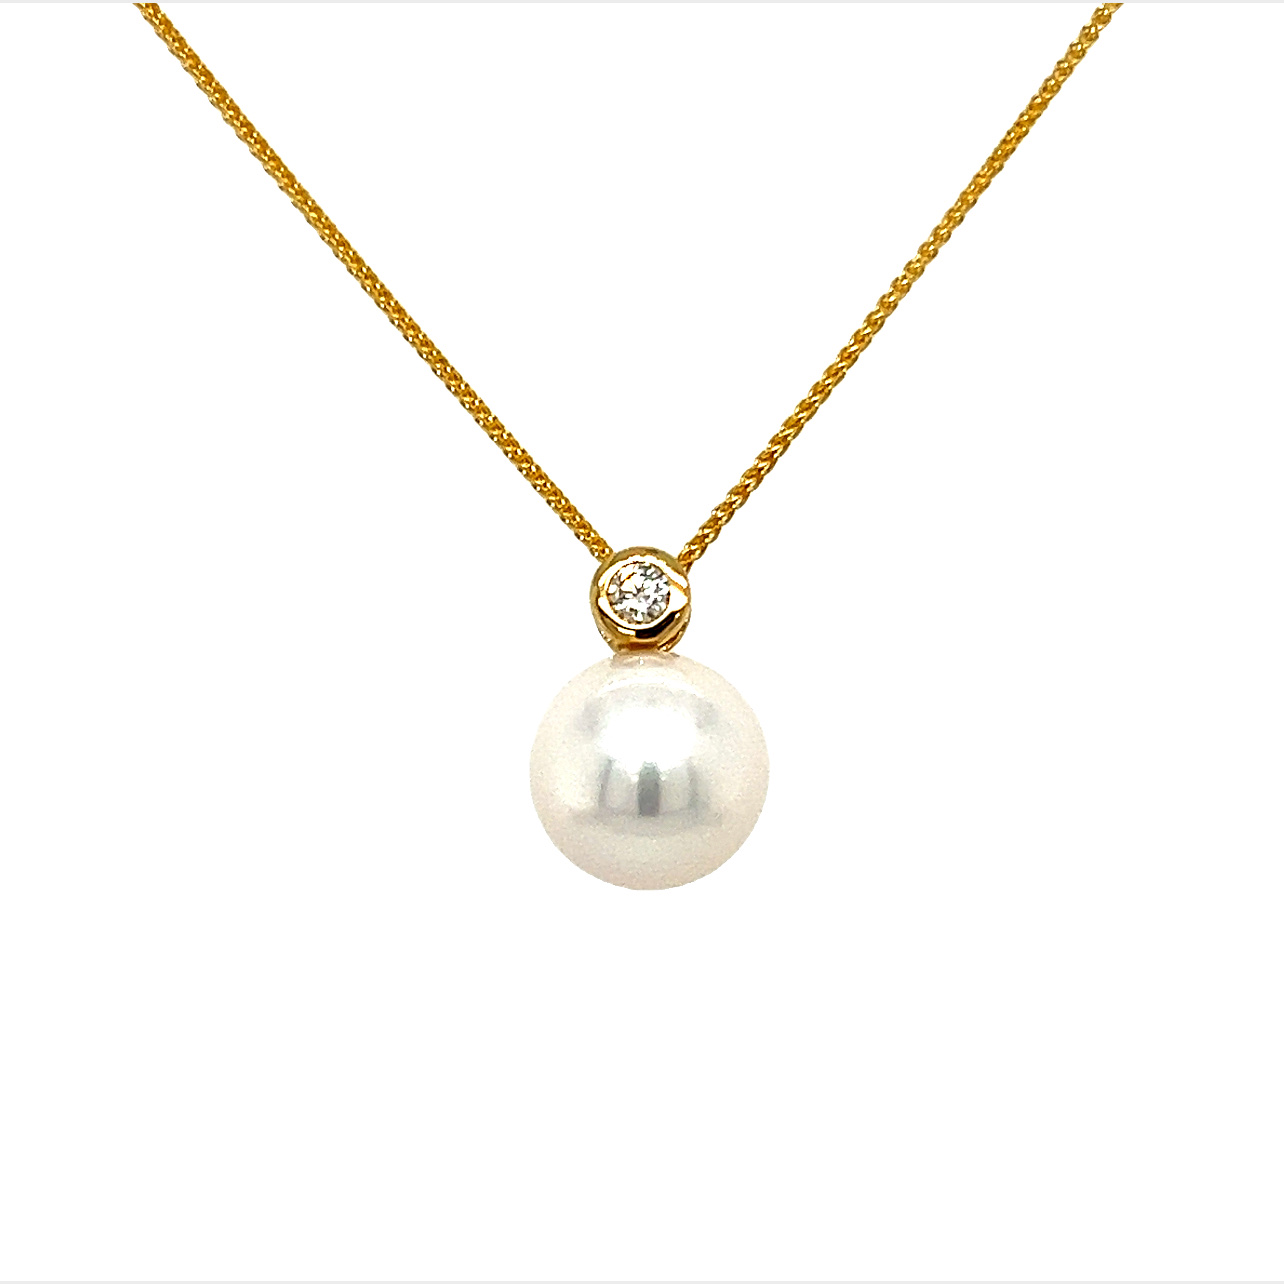 18 karat pendant with one 9.00mm cultured Pearl and one 0.08ct round brilliant G VS Diamond